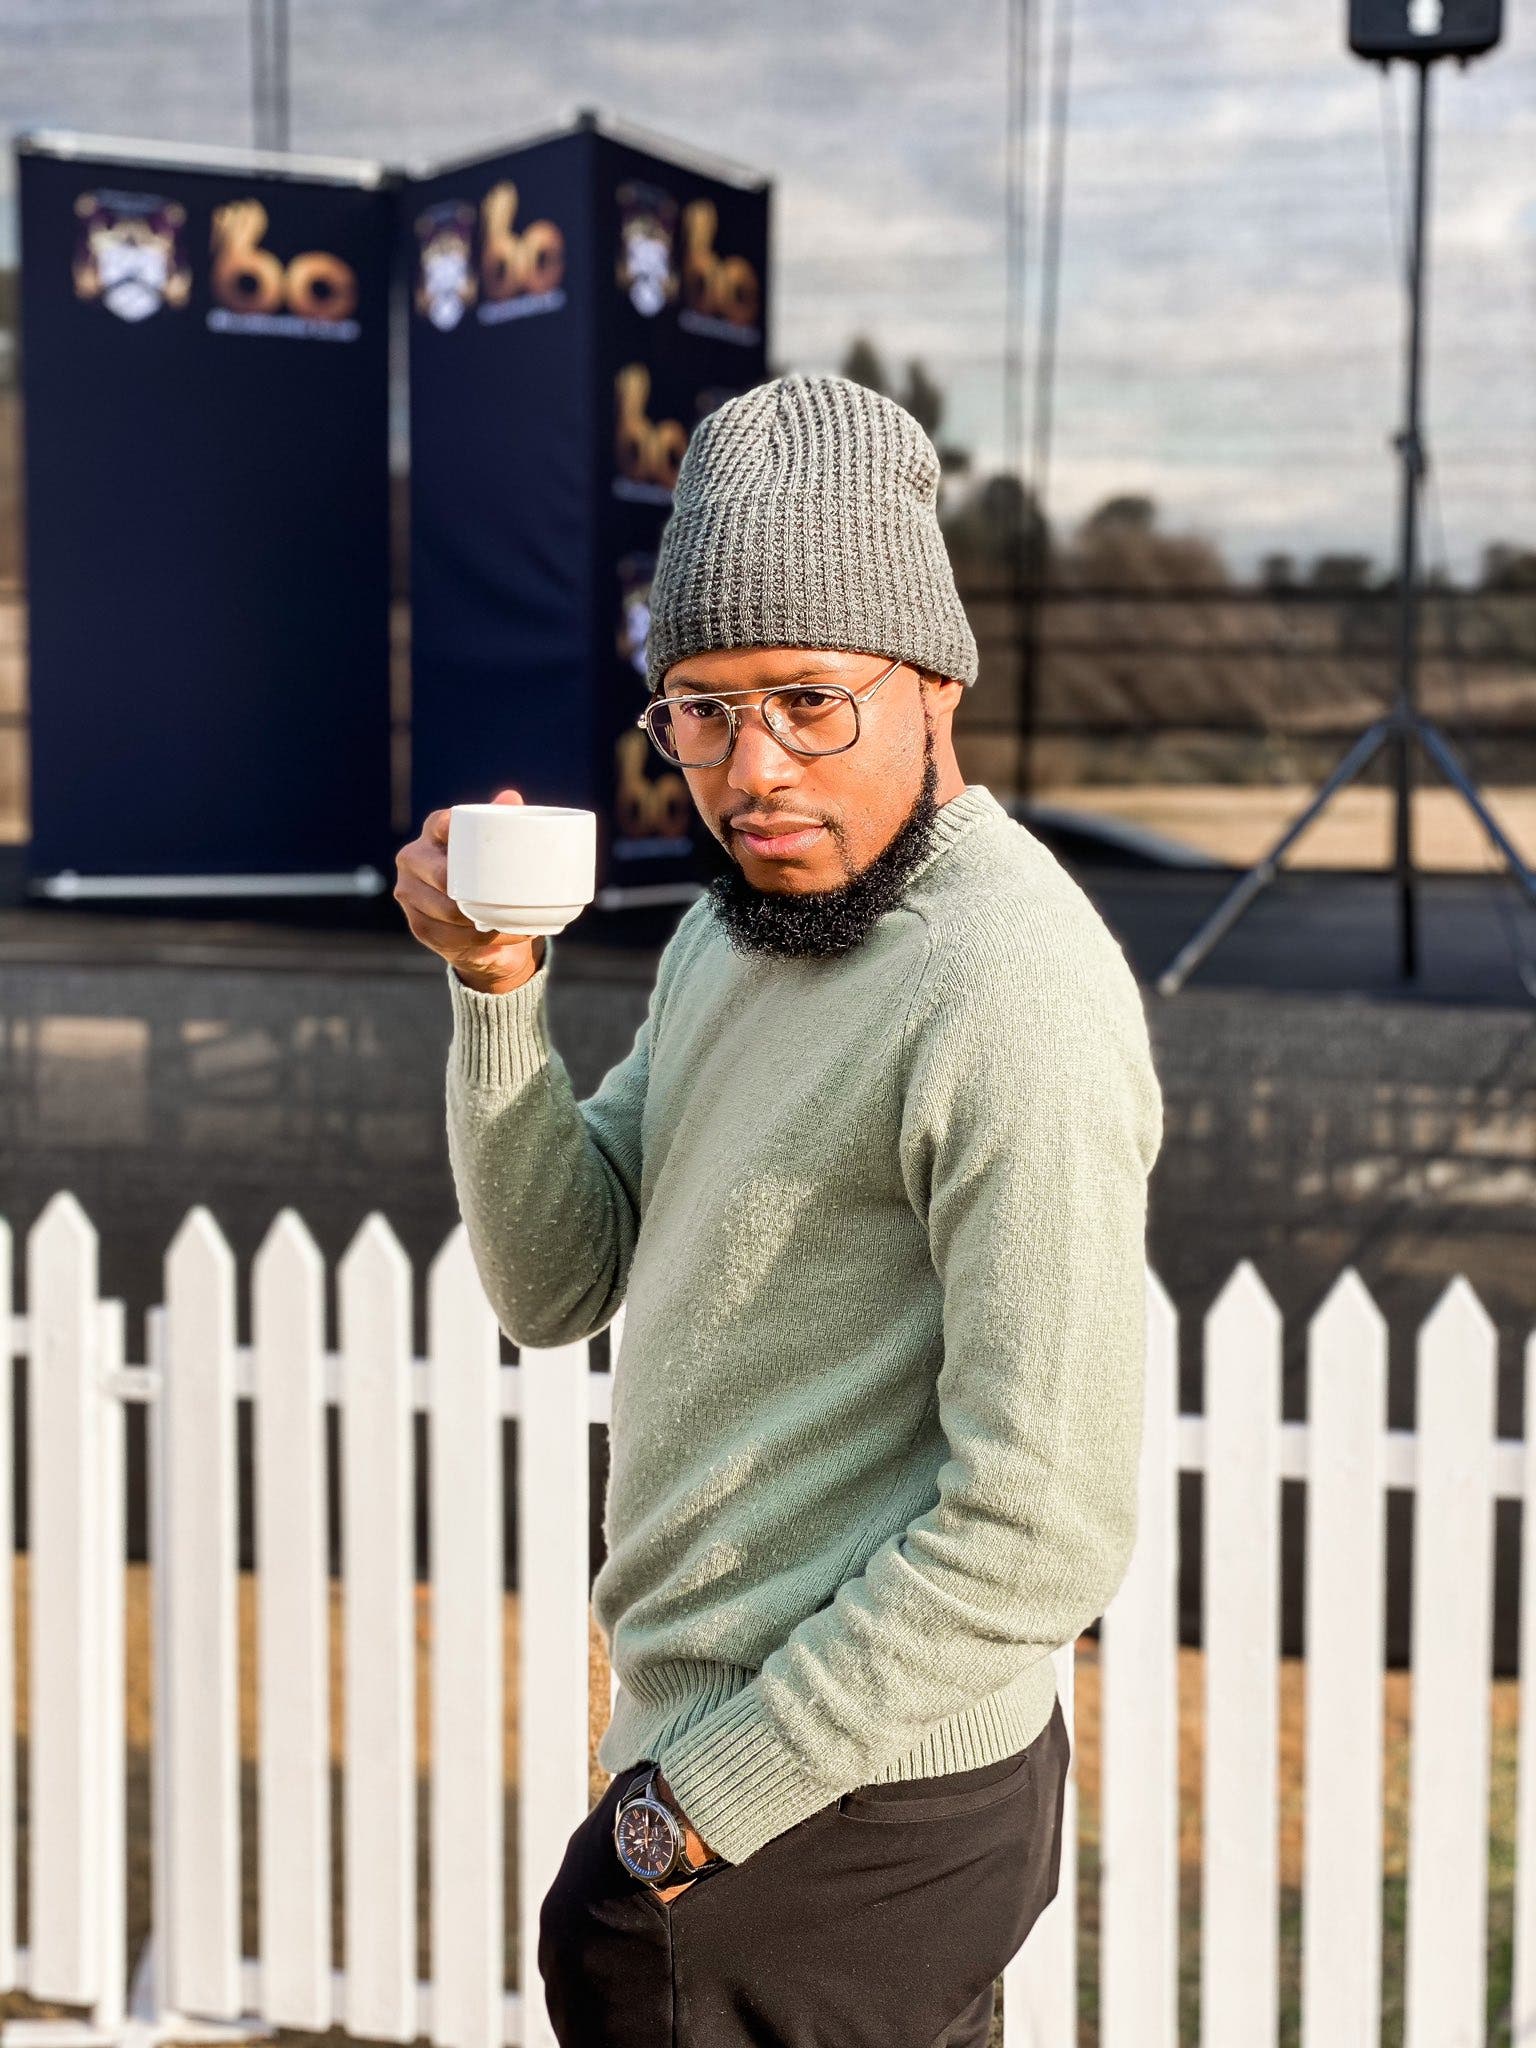 Mohale joins popular radio station as presenter